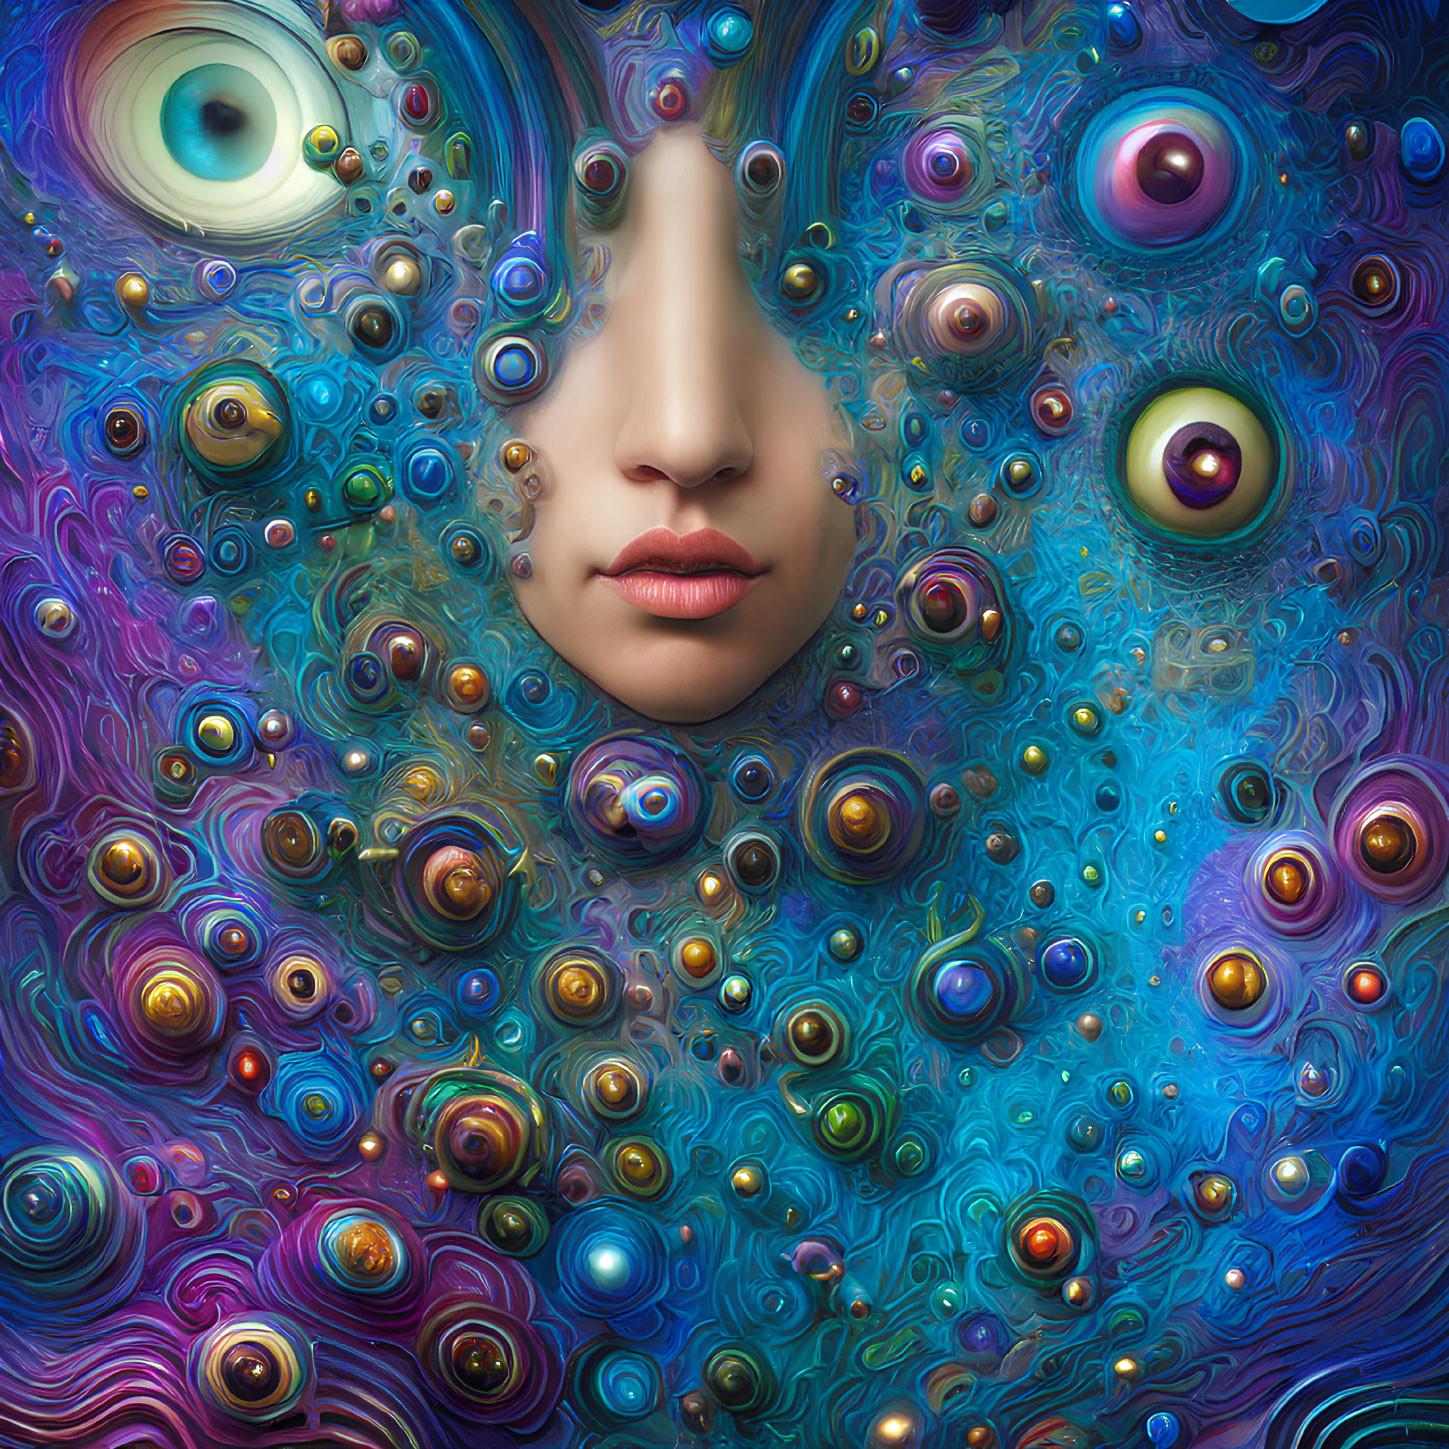 Colorful surreal portrait blending human face with swirling patterns and multiple eyes on vibrant background